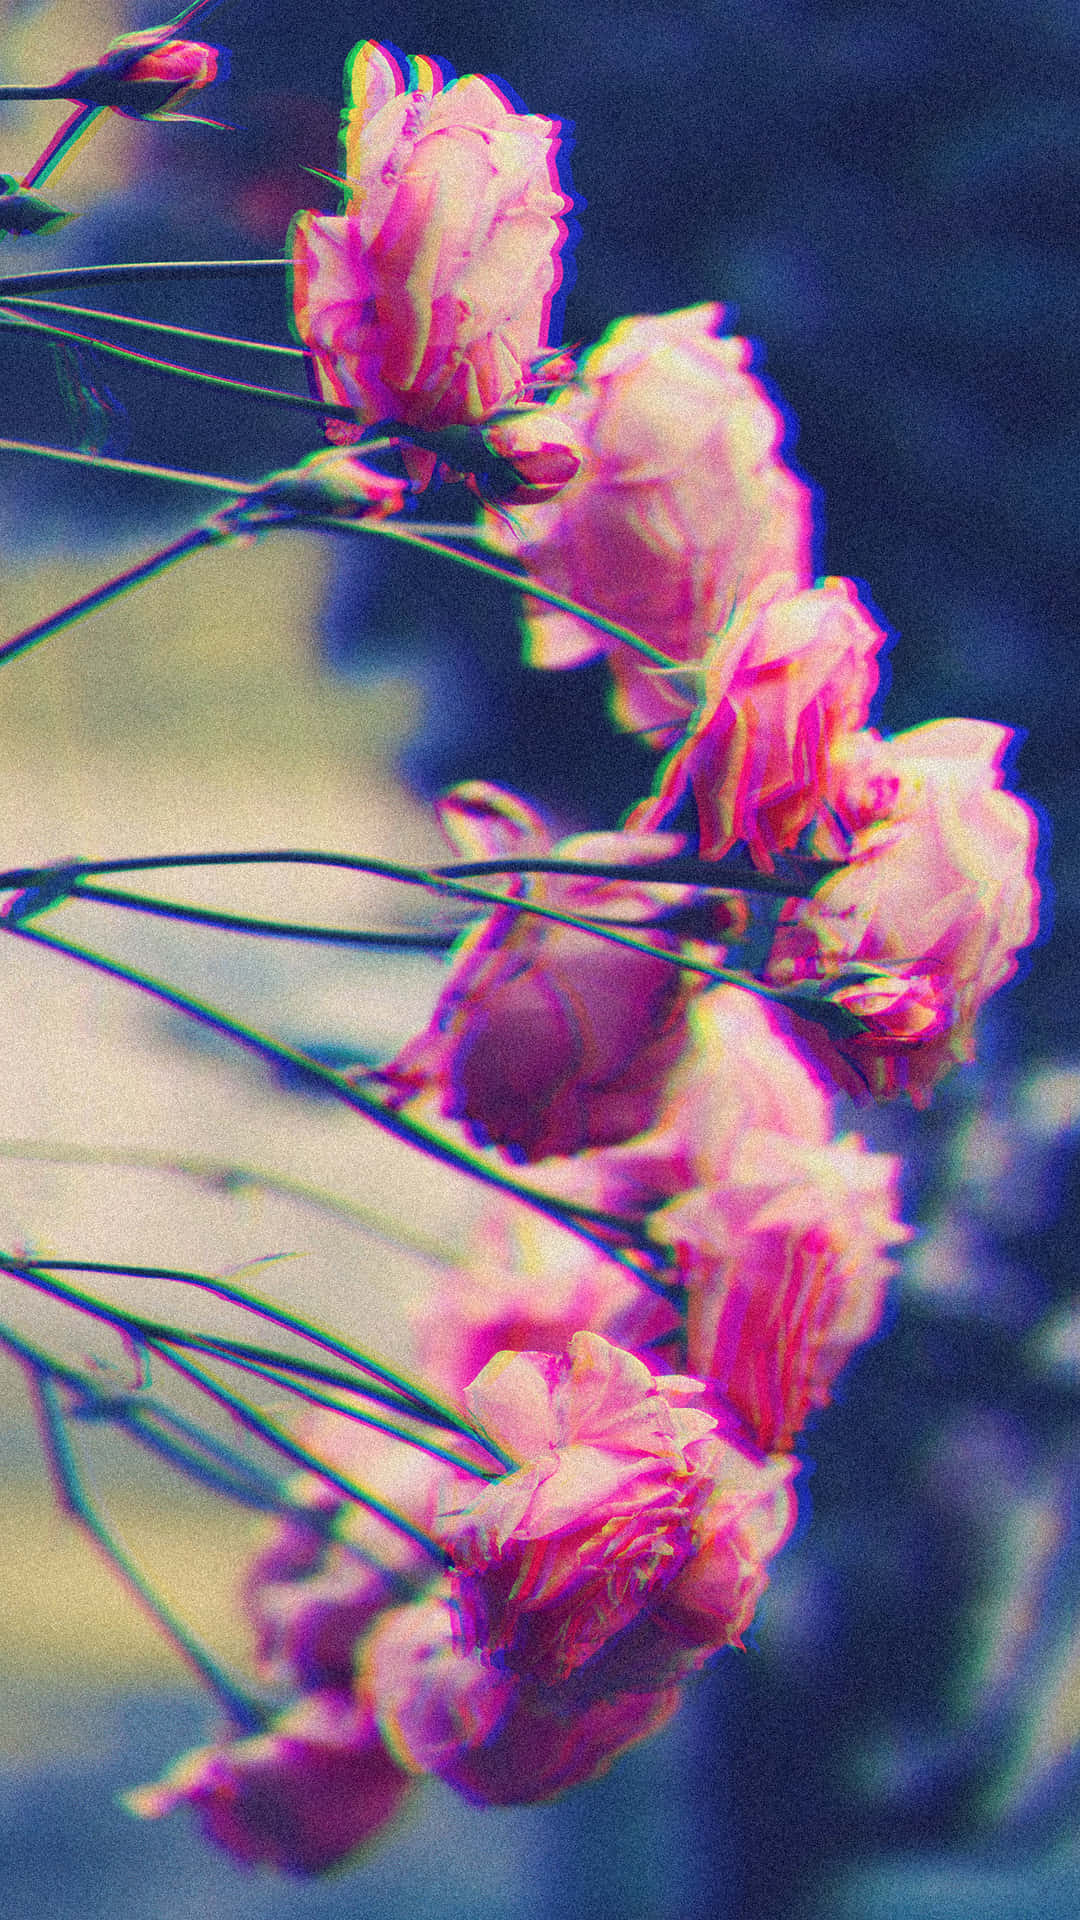 A beautiful flower with a cute aesthetic Wallpaper